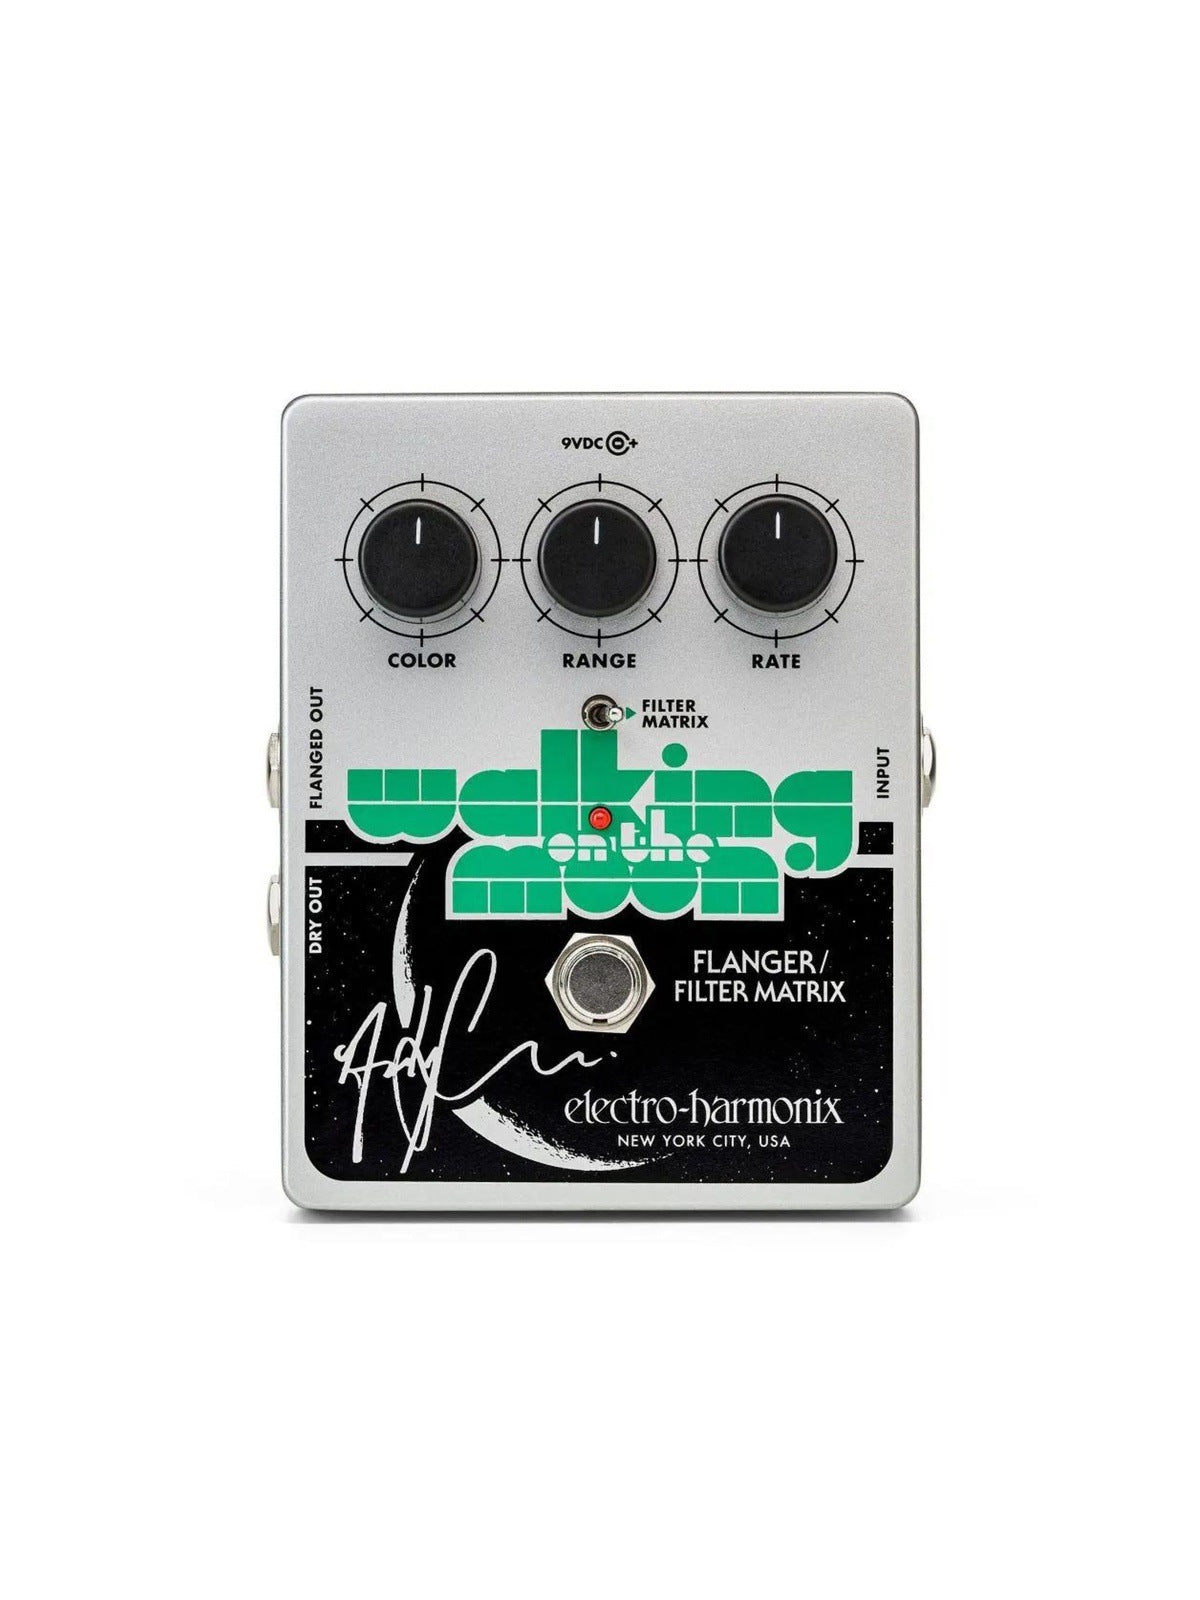 Electro Harmonix Andy Summers Walking On The Moon Analog Flanger / Filter Matrix